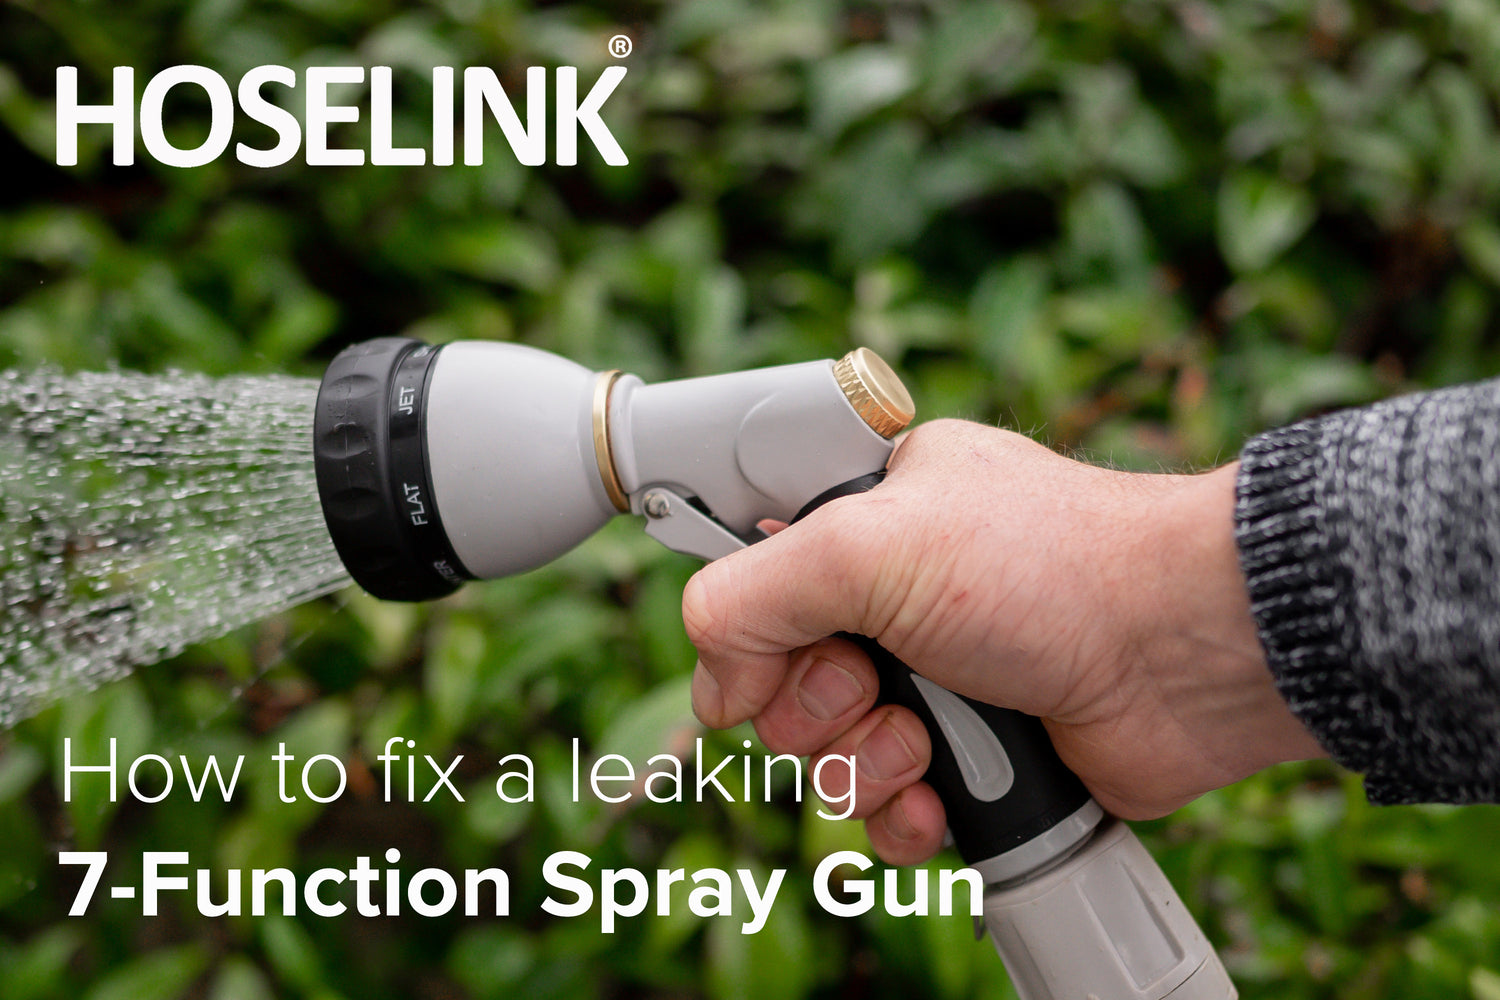 How to fix a leaking Hoselink 7-Function Spray Gun